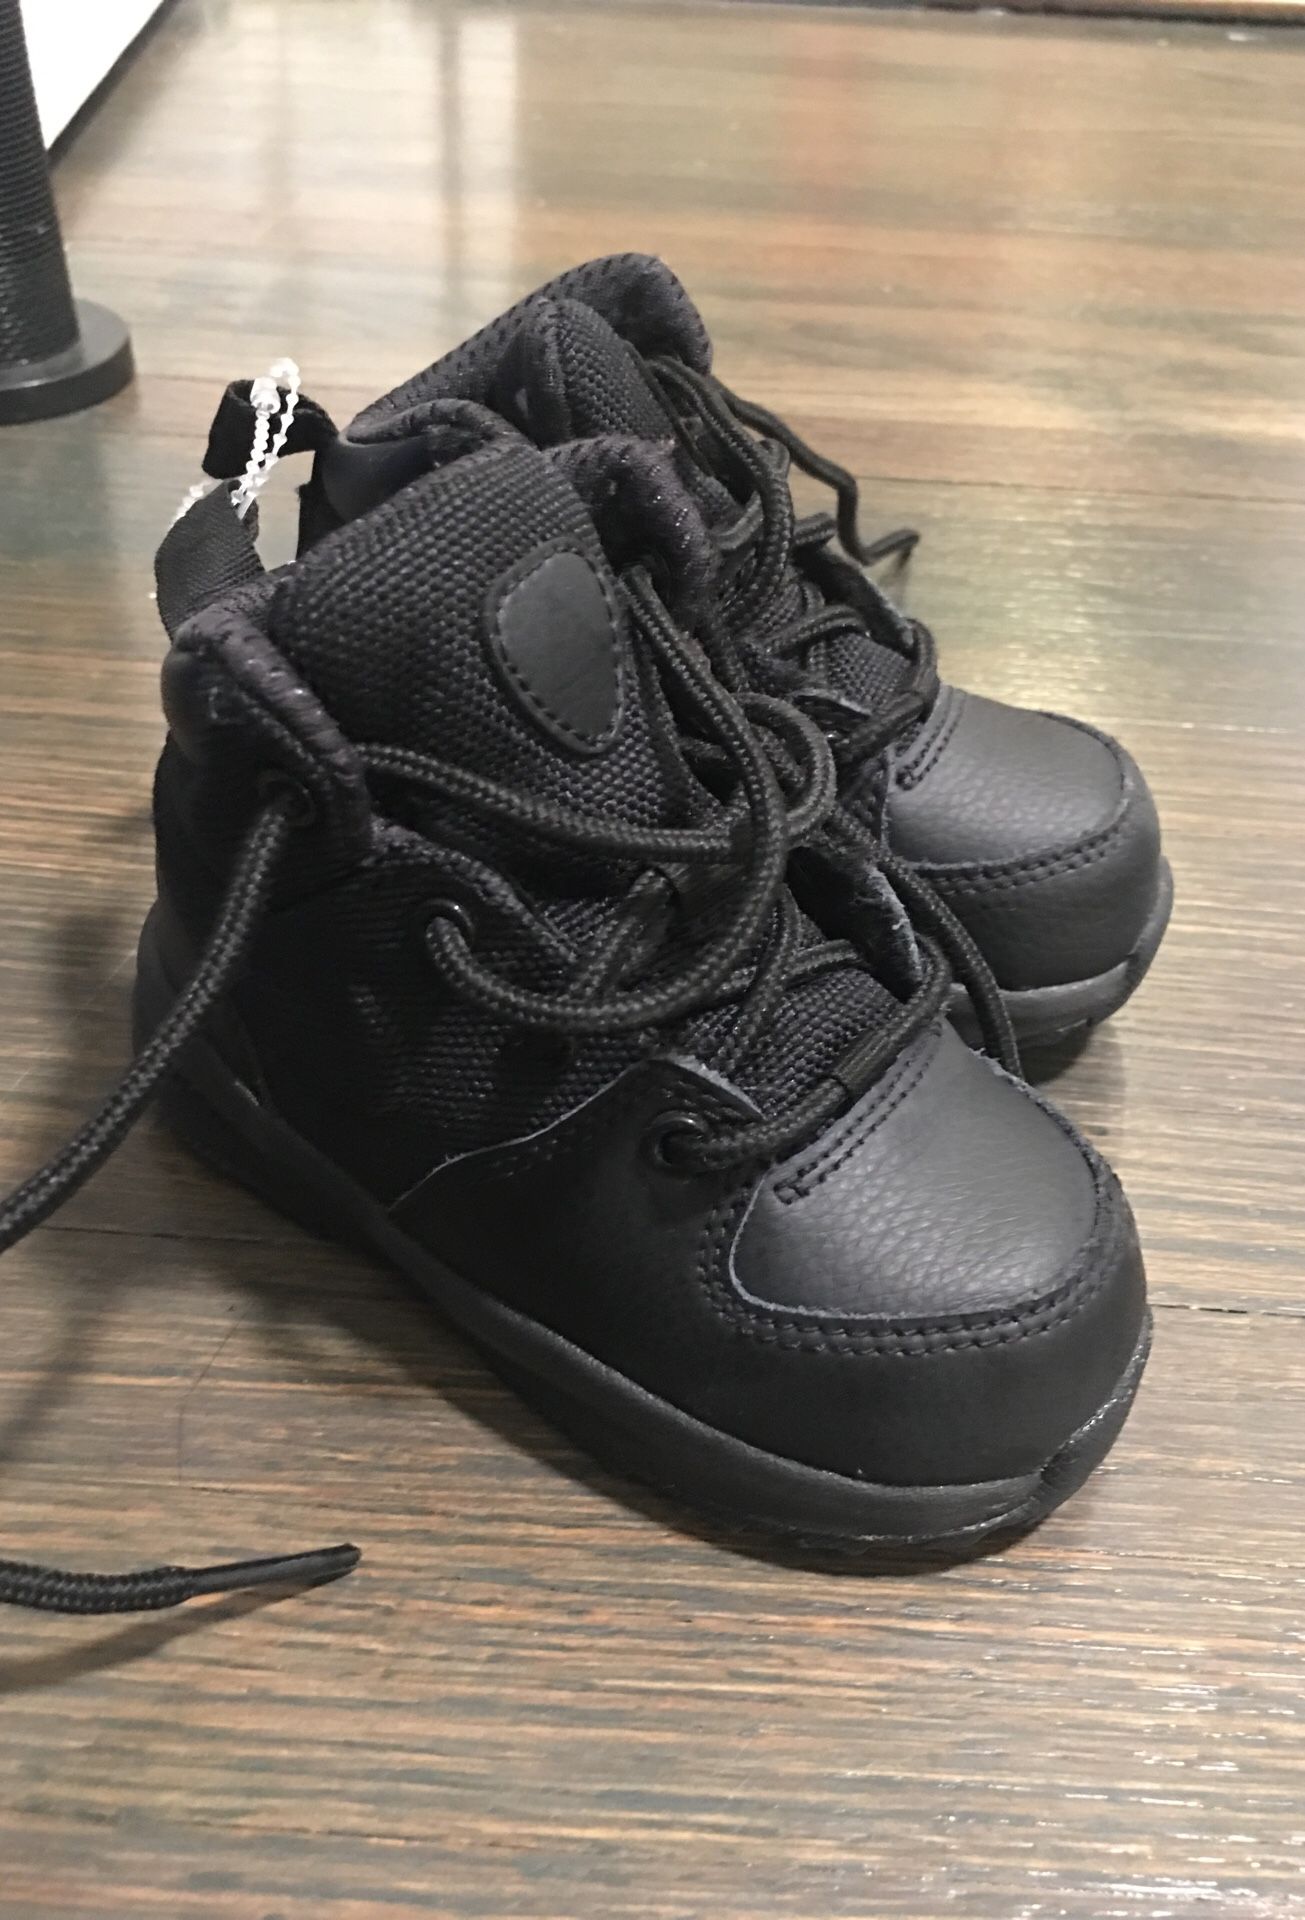 Brand New Nike ACG All Black Boots Shoes Boys Toddler Size 6